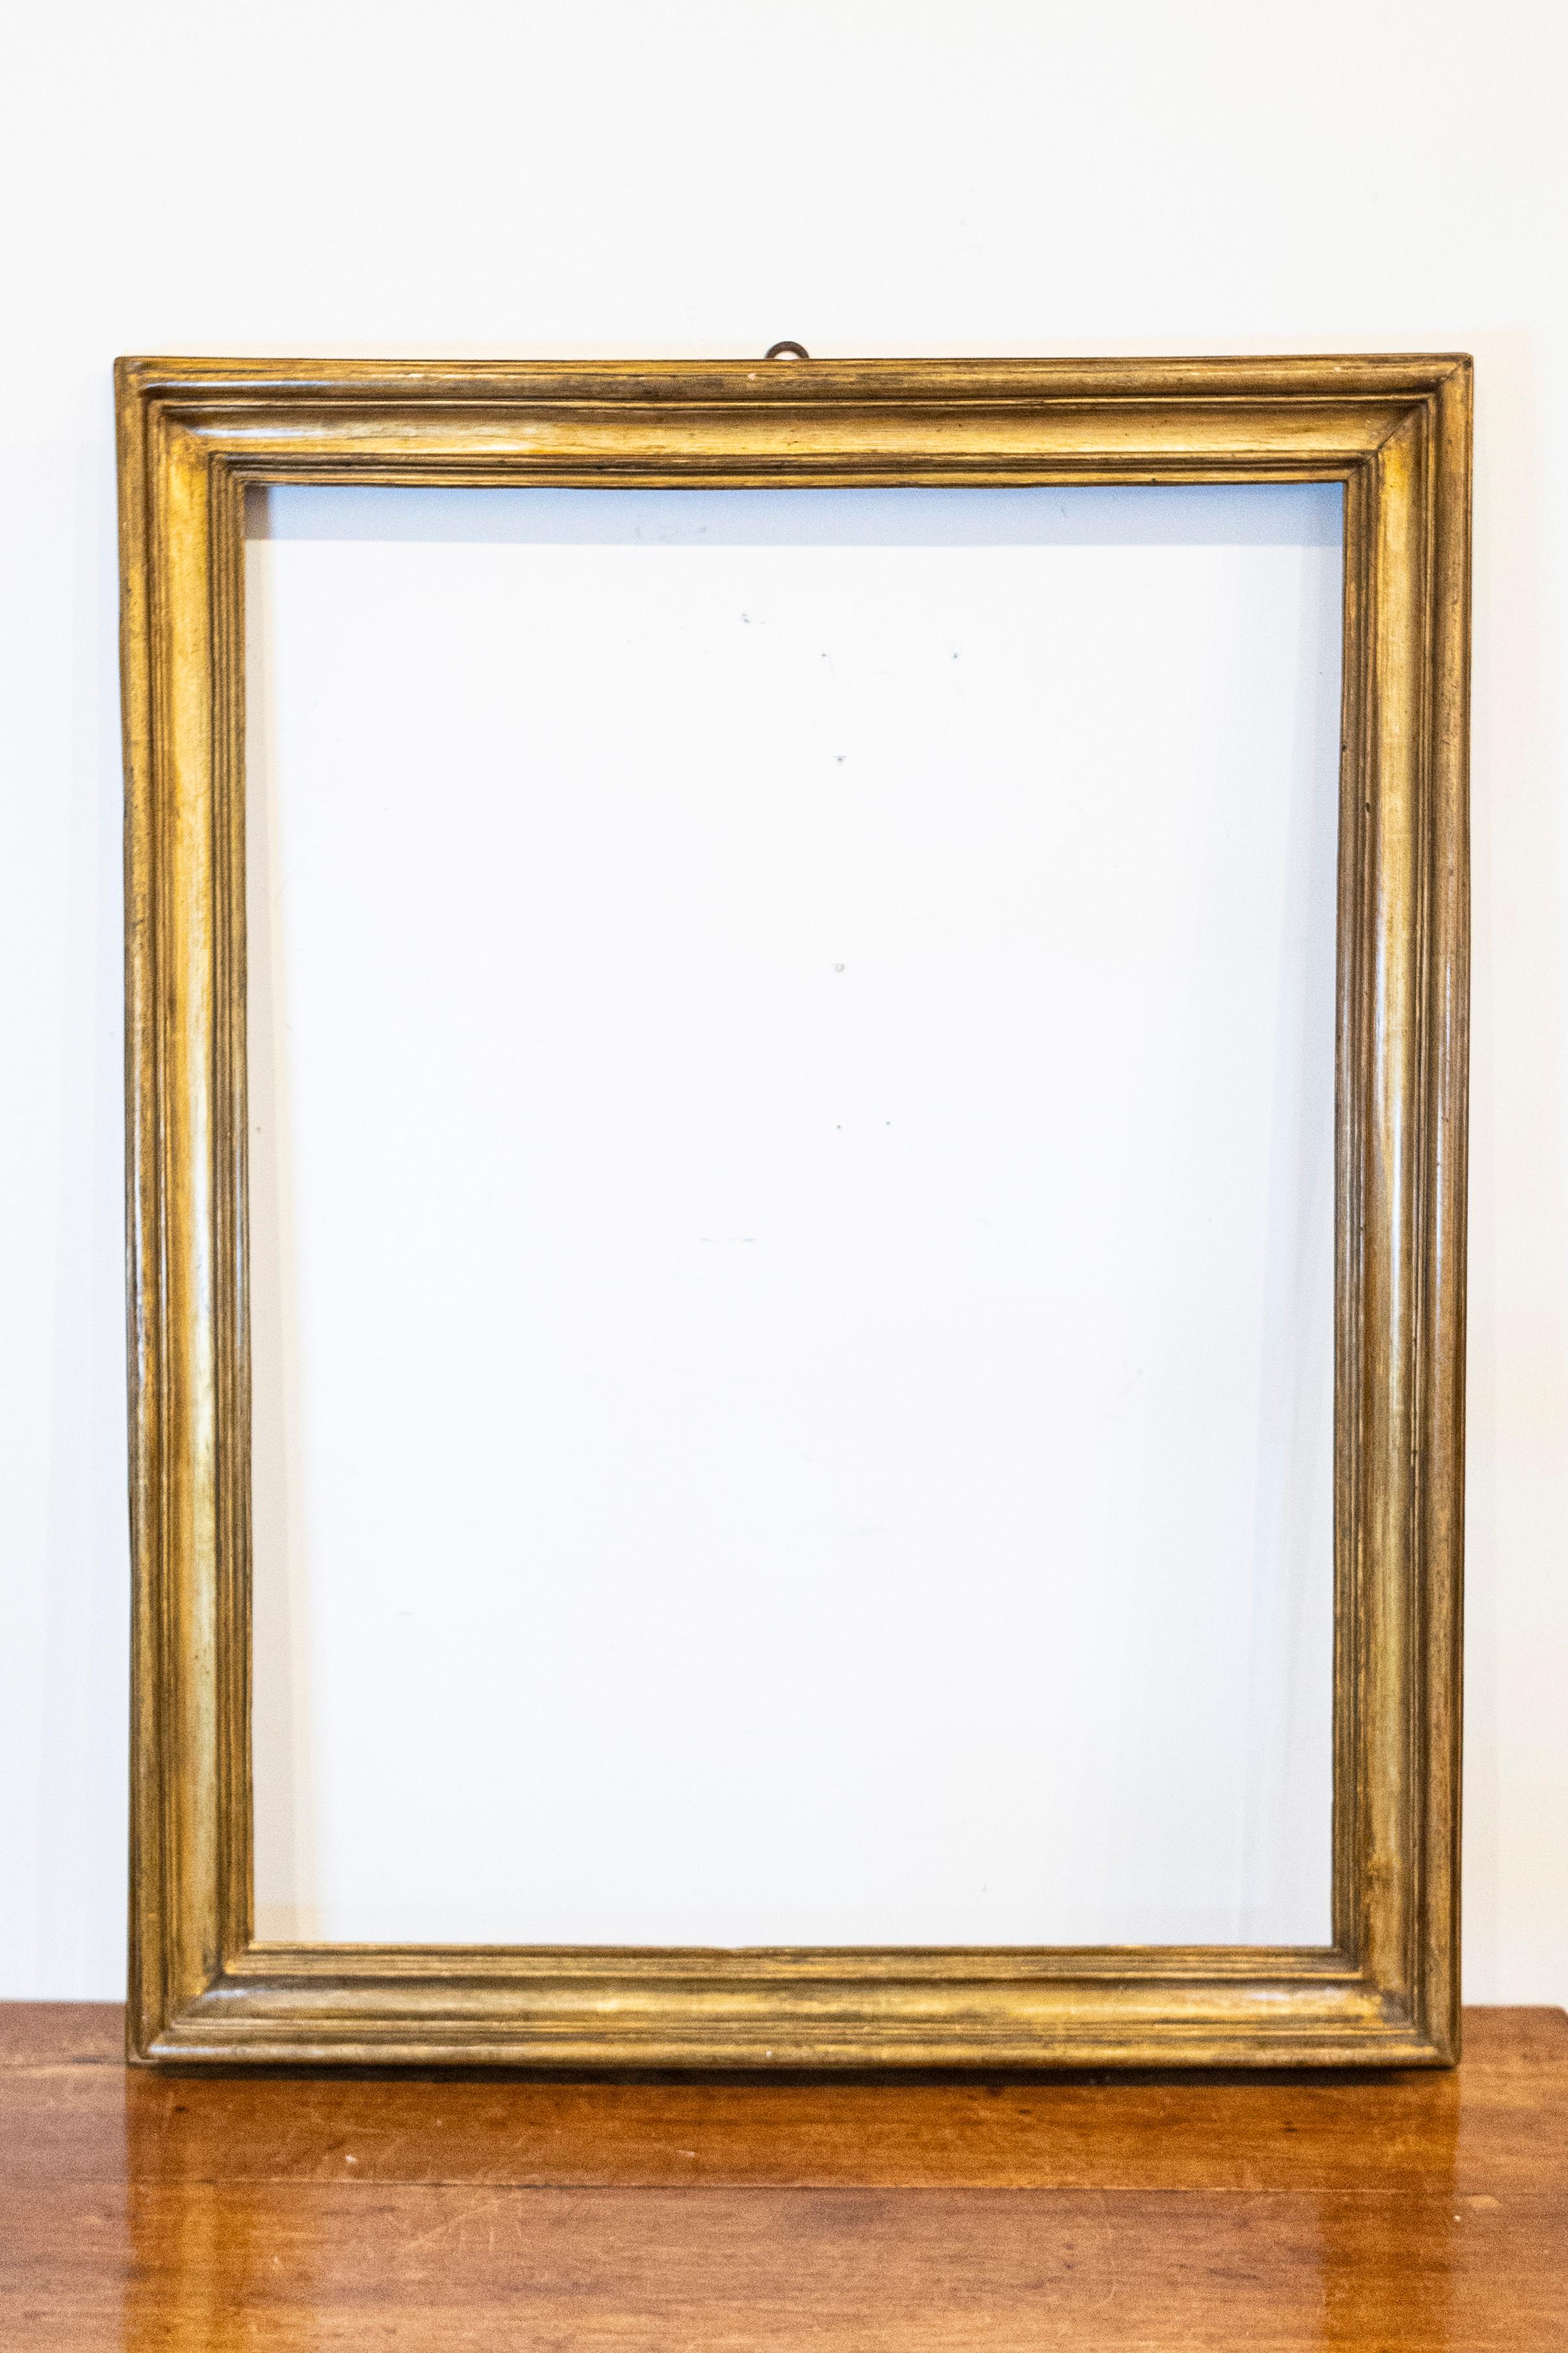 An Italian giltwood frame from the 18th century with rustic character, perfect to house a painting or a picture. This 18th-century Italian giltwood frame embodies a sense of time-worn elegance, its rustic character a testament to the beauty of aged